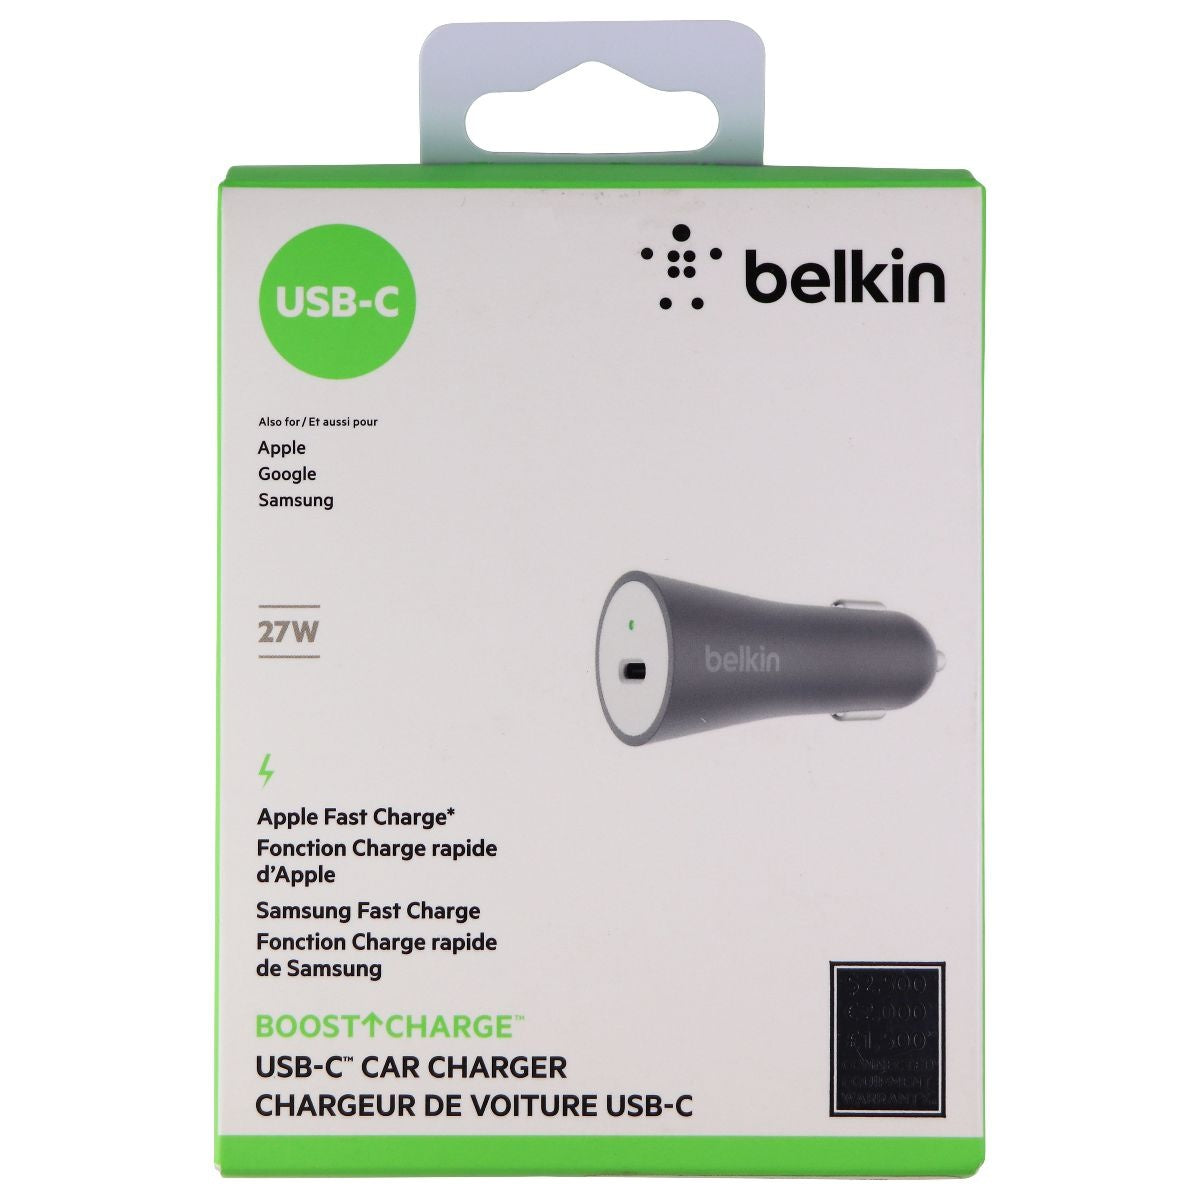 Belkin (27W) USB-C Car Charger Travel Adapter for Smartphones & More - Gray Cell Phone - Chargers & Cradles Belkin    - Simple Cell Bulk Wholesale Pricing - USA Seller